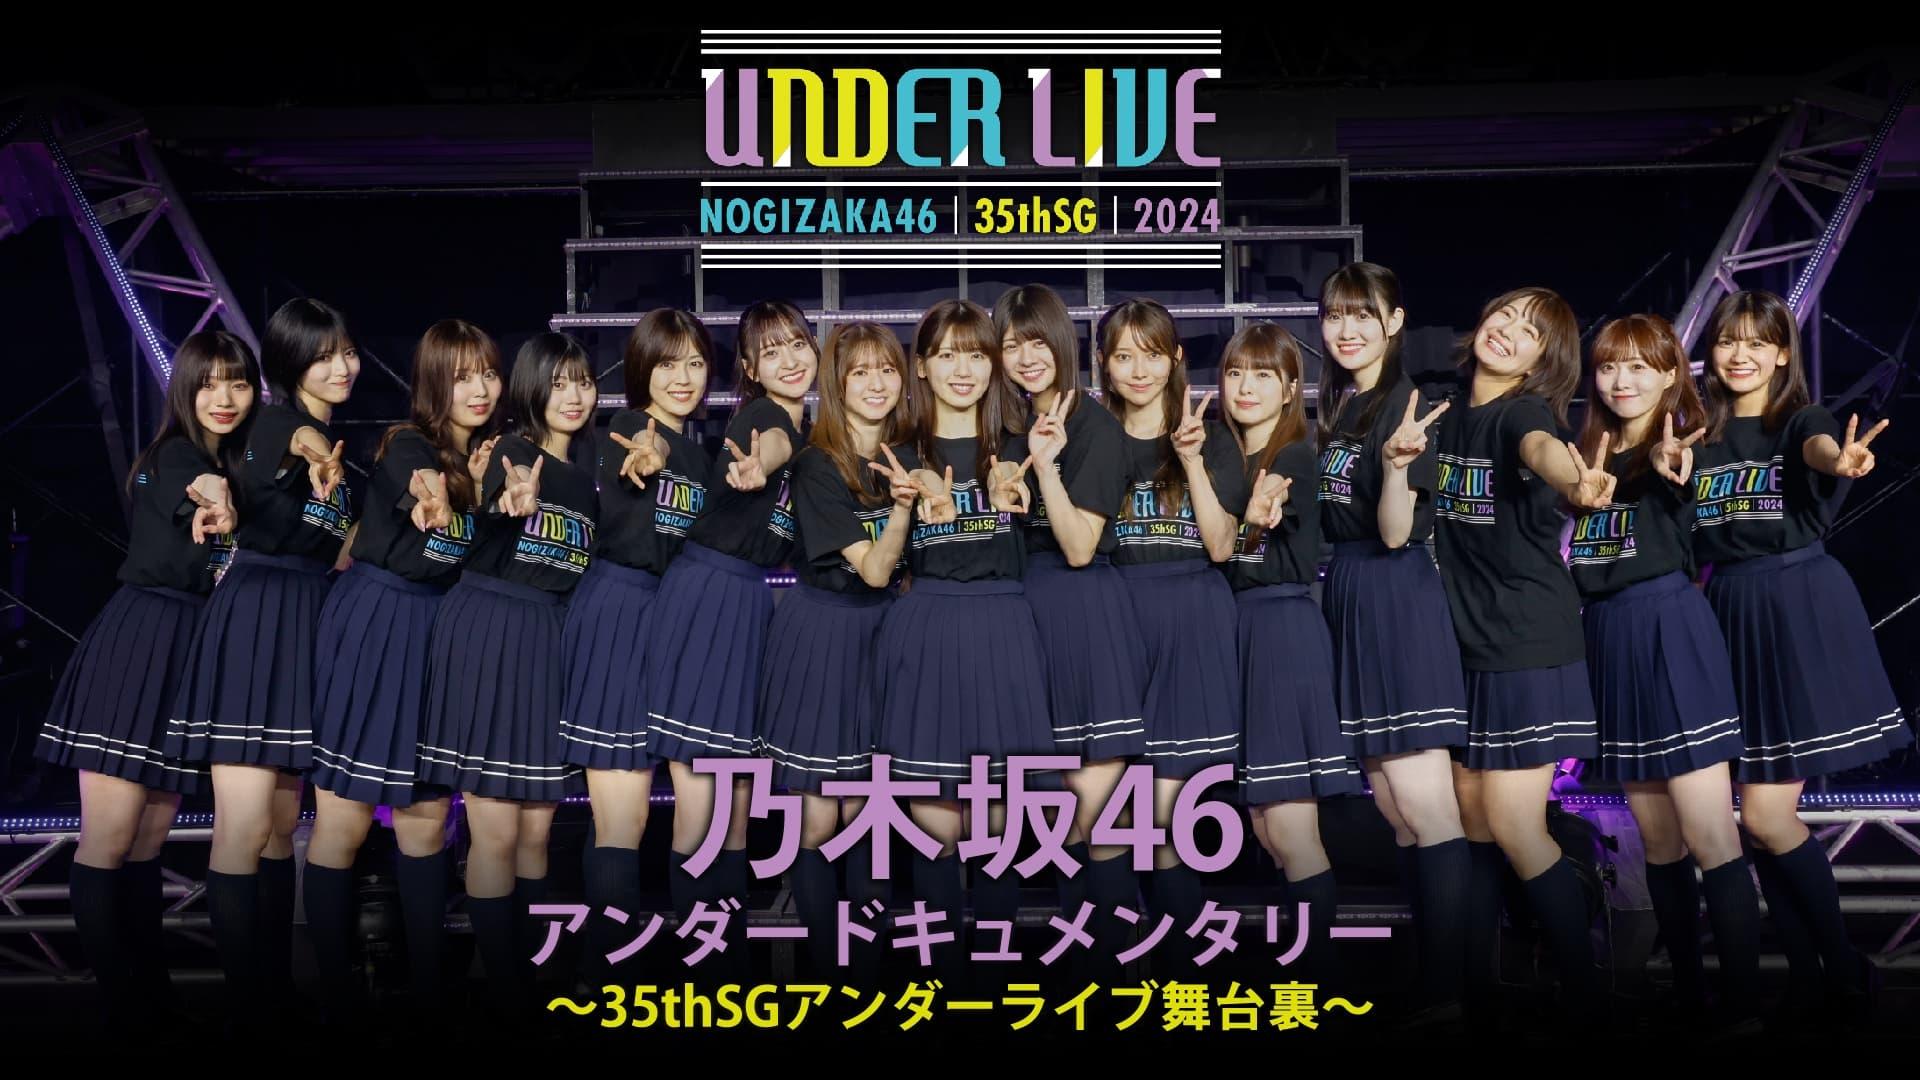 Nogizaka46 35thSG Under Live behind the scenes documentary backdrop